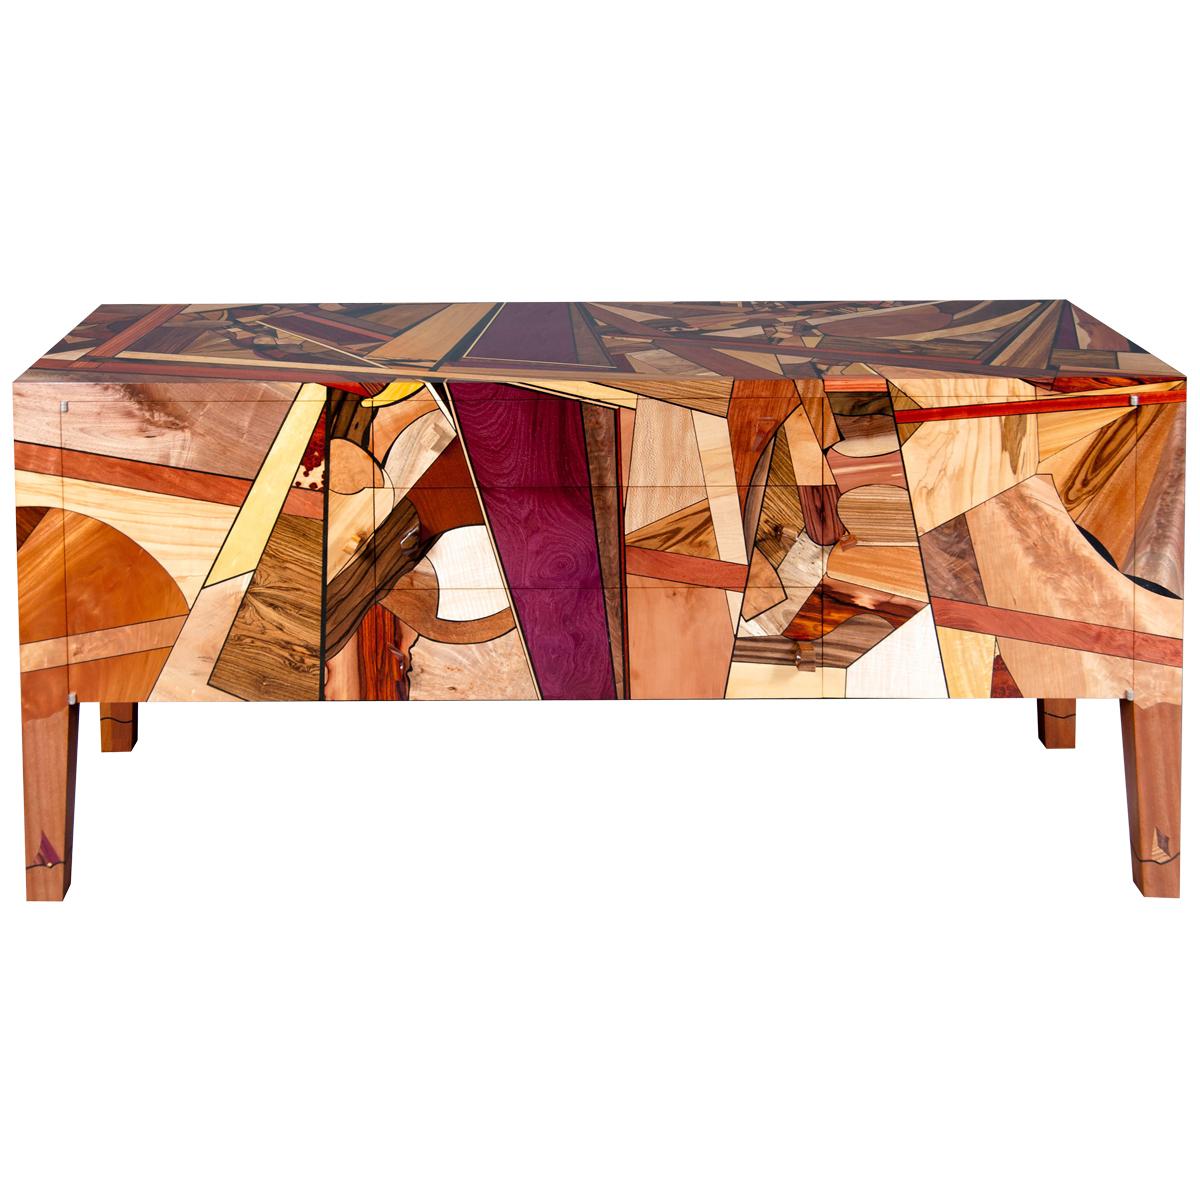 Colorful, Art Inspired,  Mosaic Decorated, Meticulously  Crafted, Credenza For Sale